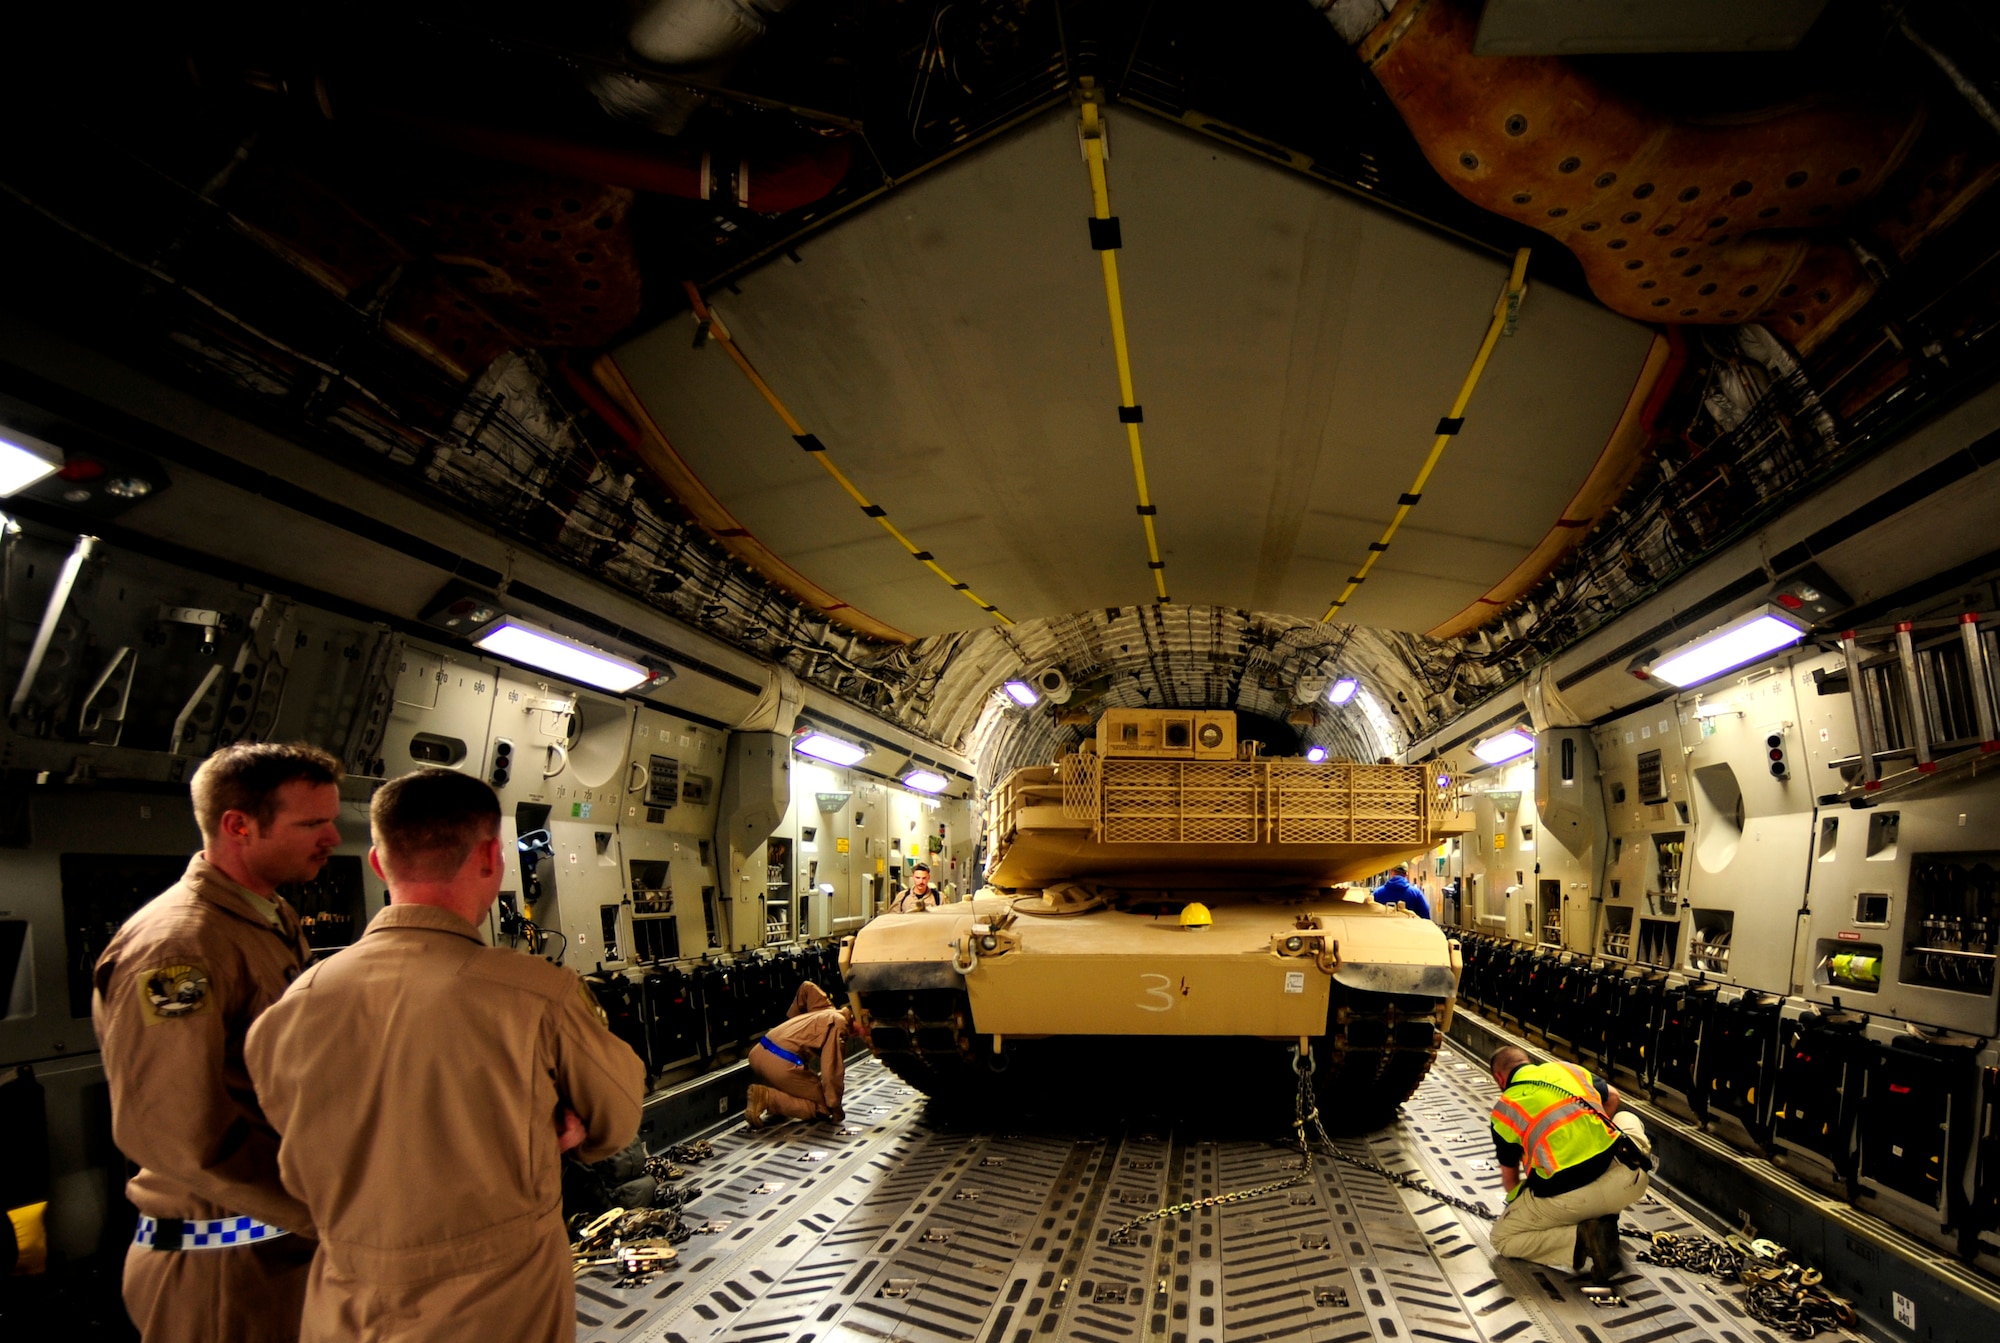 A C-17 Globemaster III aircraft crew assigned to the 816th Expeditionary Airlift Squadron (EAS) loads a Marine Corps M1A1 Abrams tank for aerial transport to Afghanistan in support of Operation Enduring Freedom on Nov. 28, 2010. The 816th EAS is an airlift unit assigned to an undisclosed location in Southwest Asia. (U.S. Air Force Photo/Staff Sgt. Andy M. Kin)